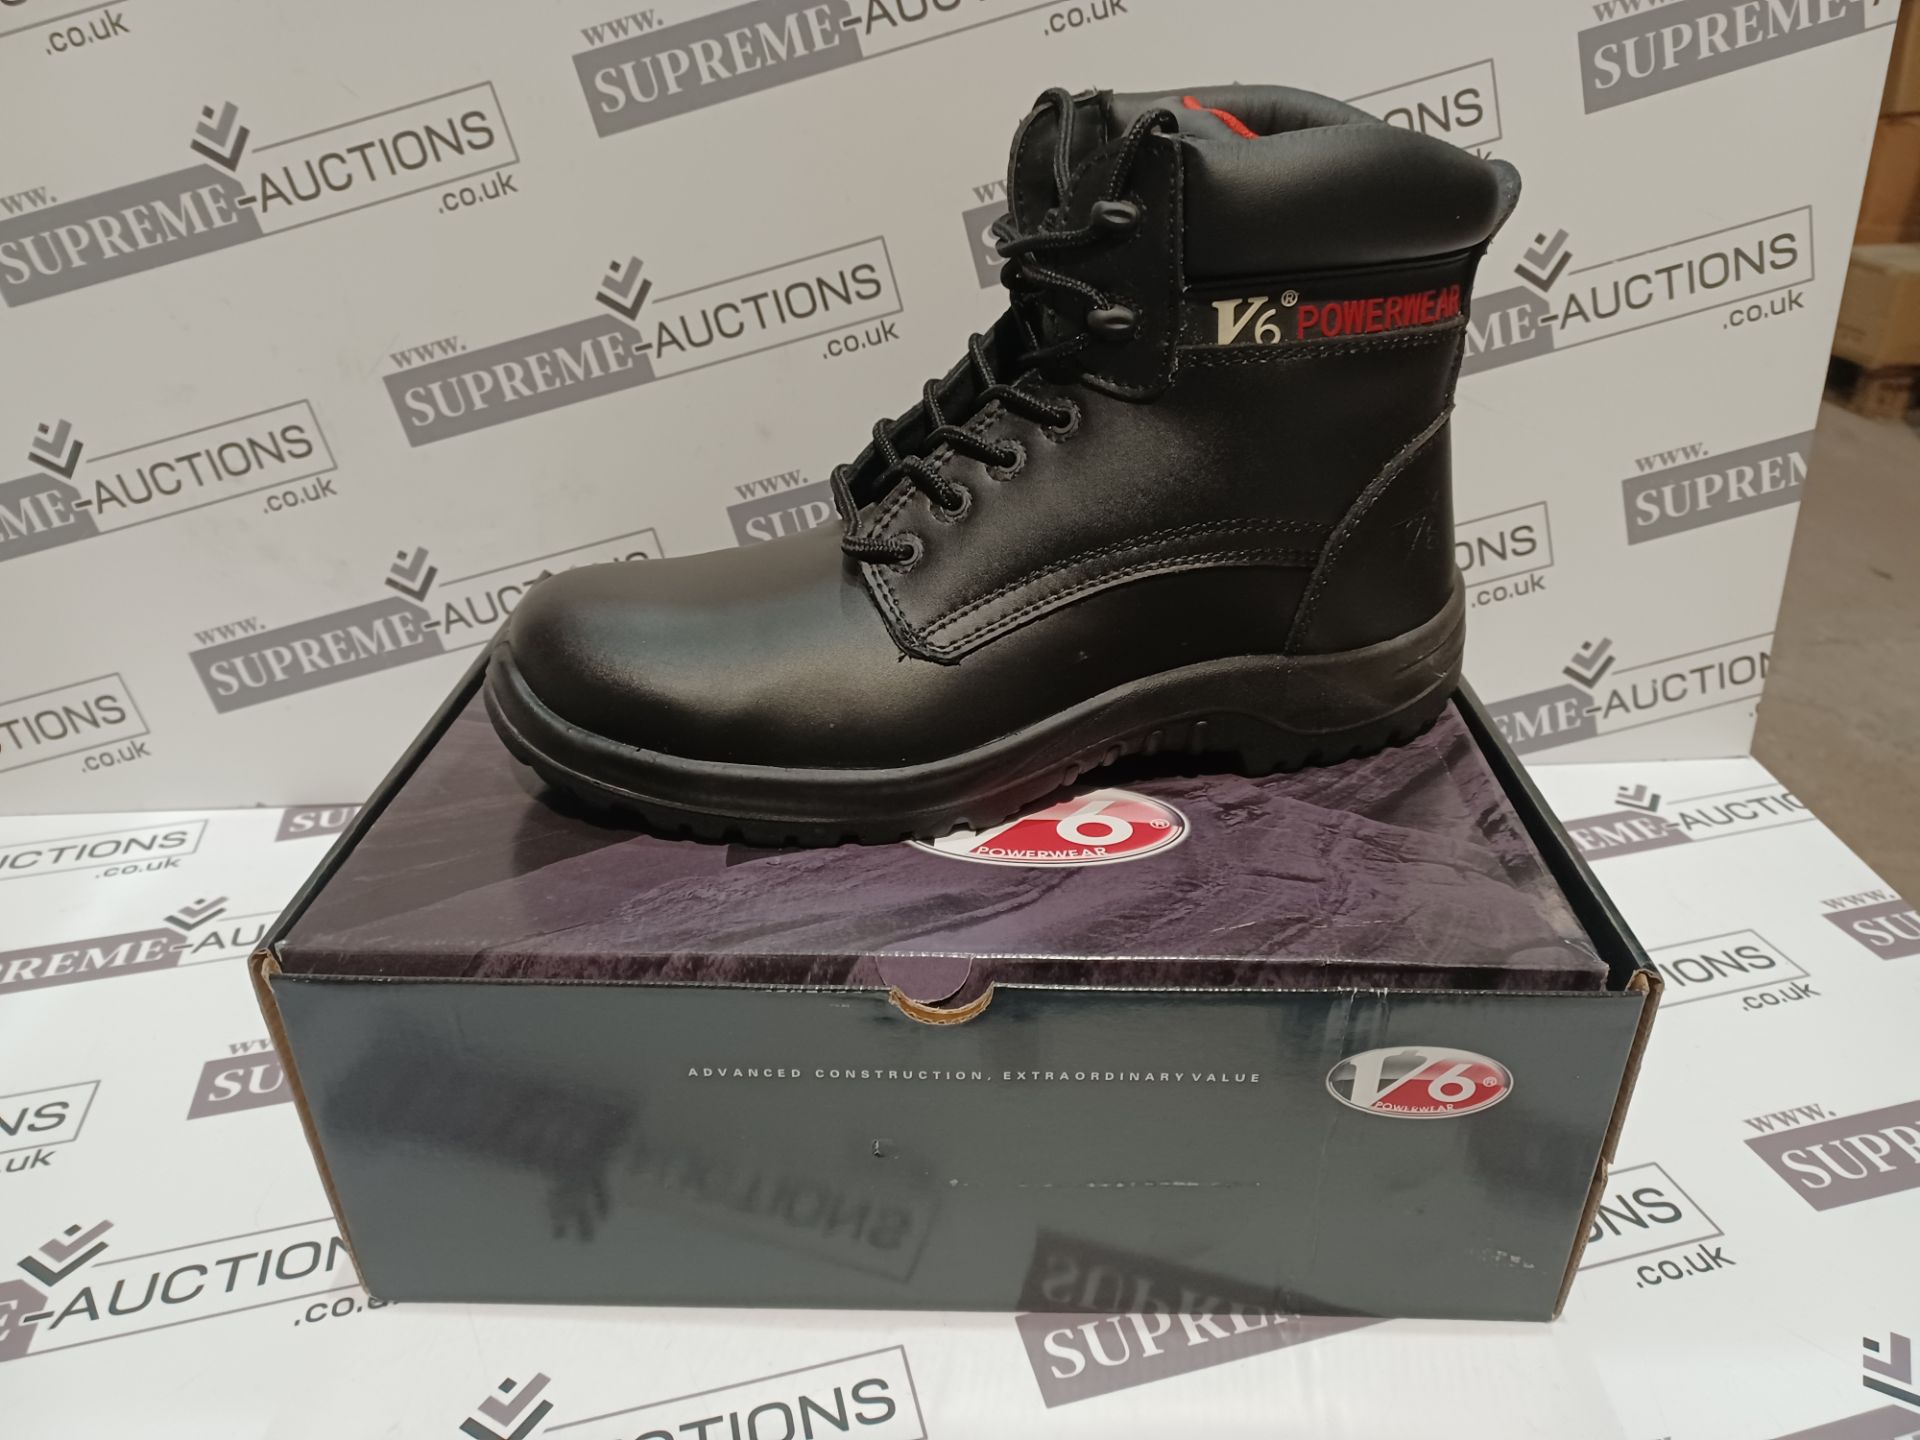 7 X BRAND NEW V6 OTTER PROFESSIONAL WORK BOOTS IN VARIOUS SIZES R12-11